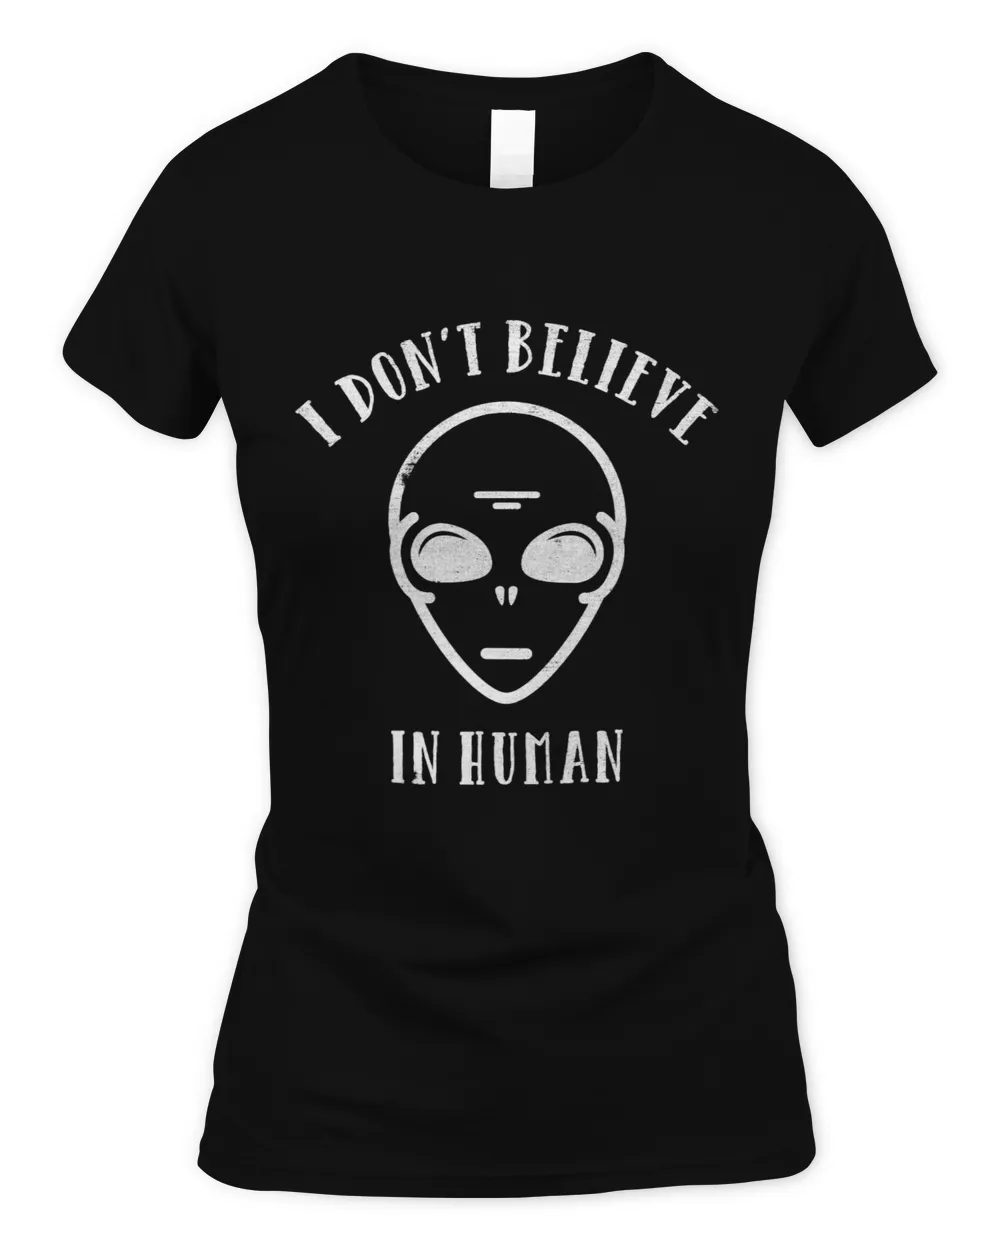 Funny Alien Lover I Dont Believe In Humans Humor Space